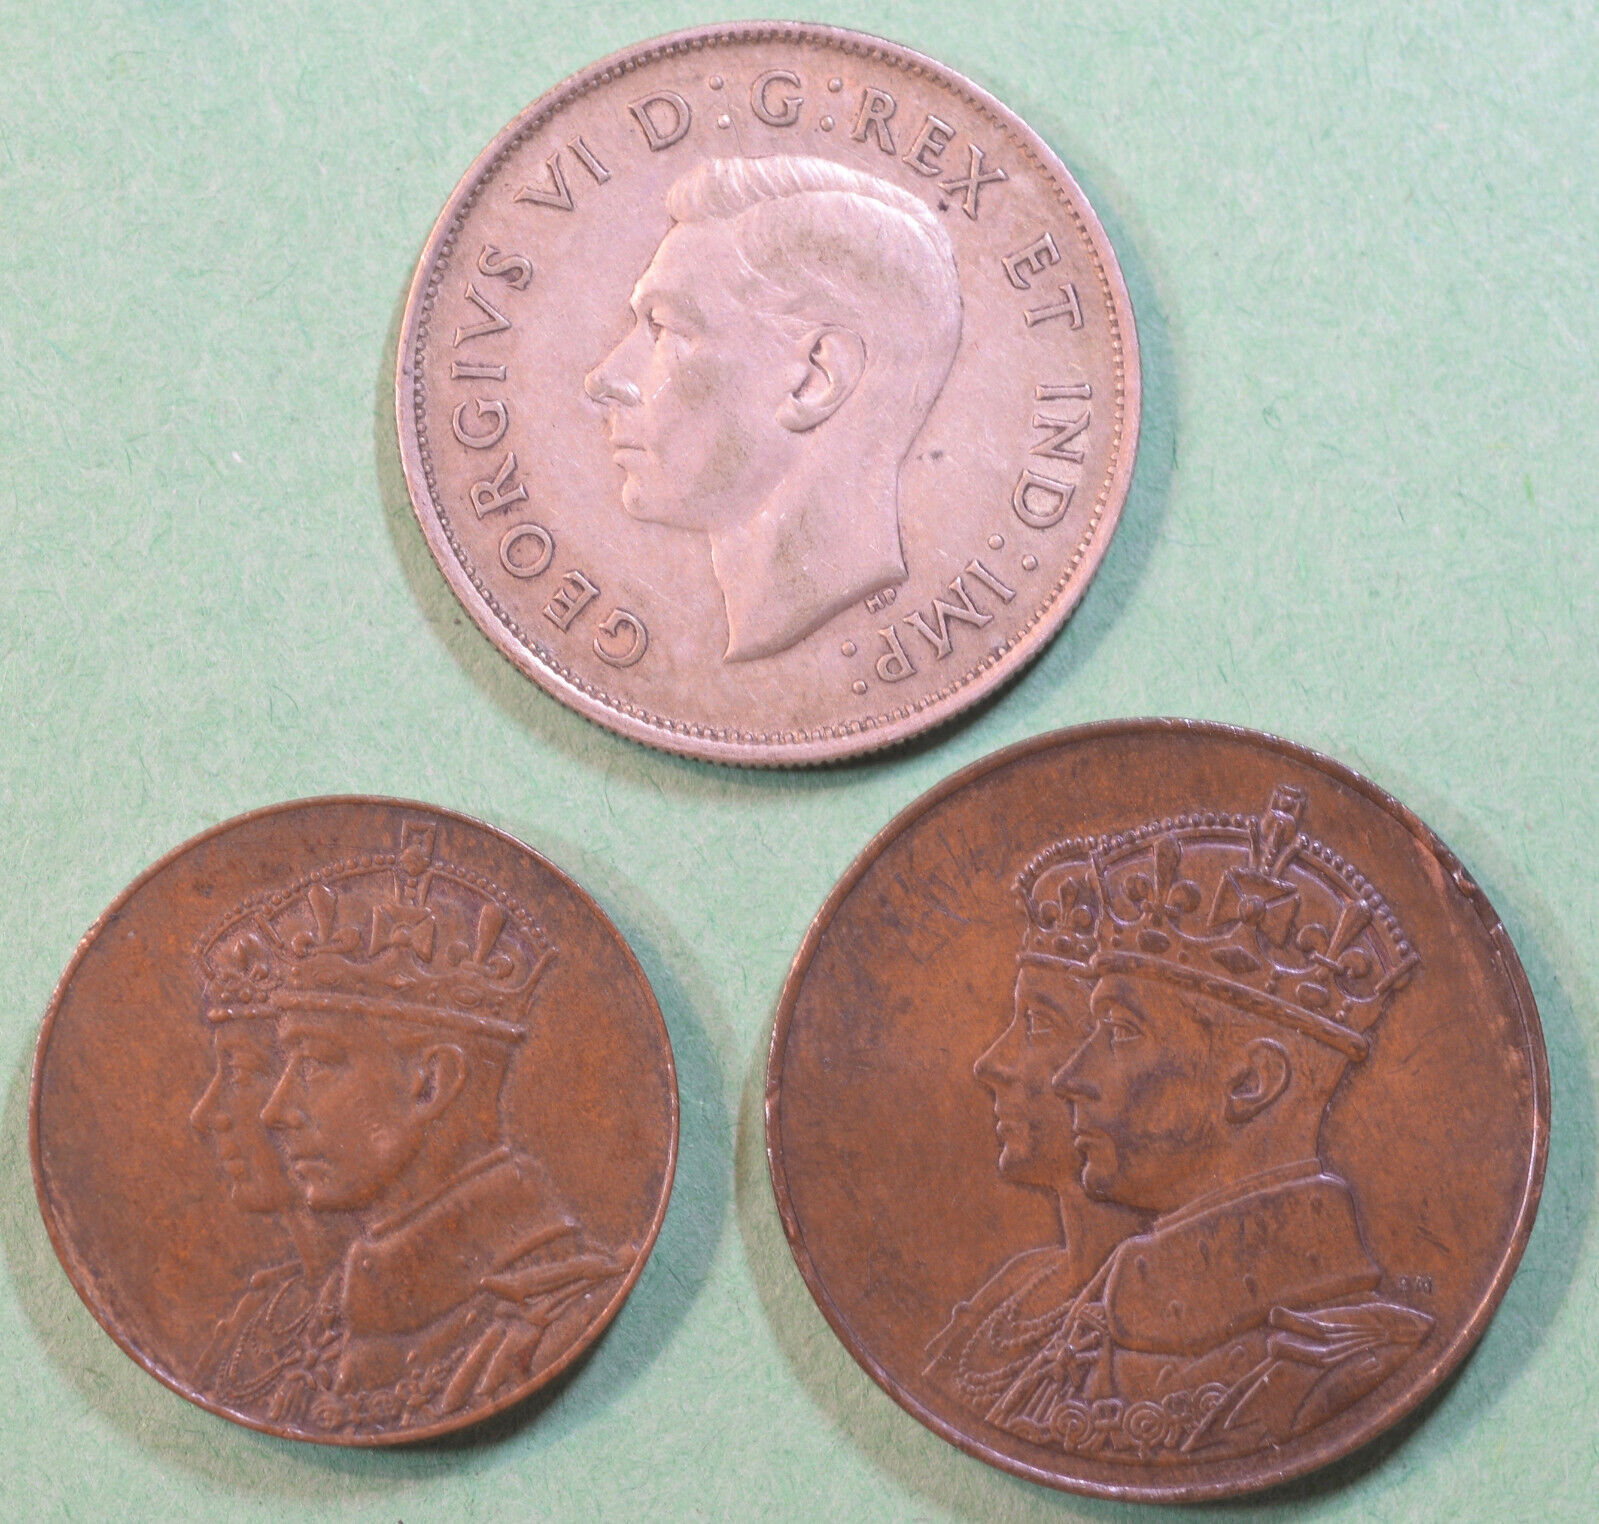 1940 Canada Half Dollar And Two 1939 Canadiain Tokens